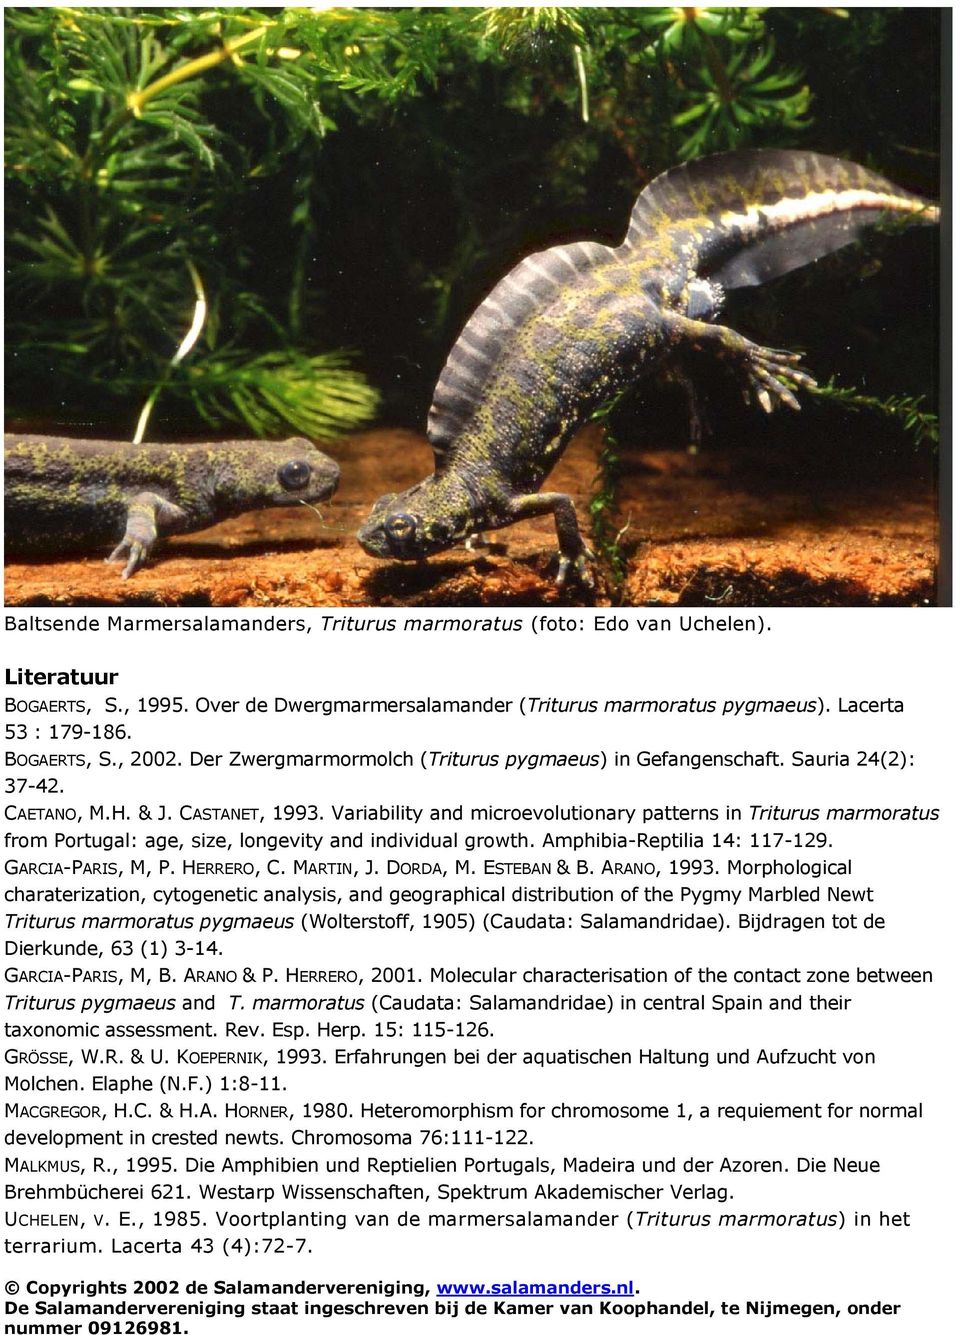 Variability and microevolutionary patterns in from Portugal: age, size, longevity and individual growth. Amphibia-Reptilia 14: 117-129. GARCIA-PARIS, M, P. HERRERO, C. MARTIN, J. DORDA, M.